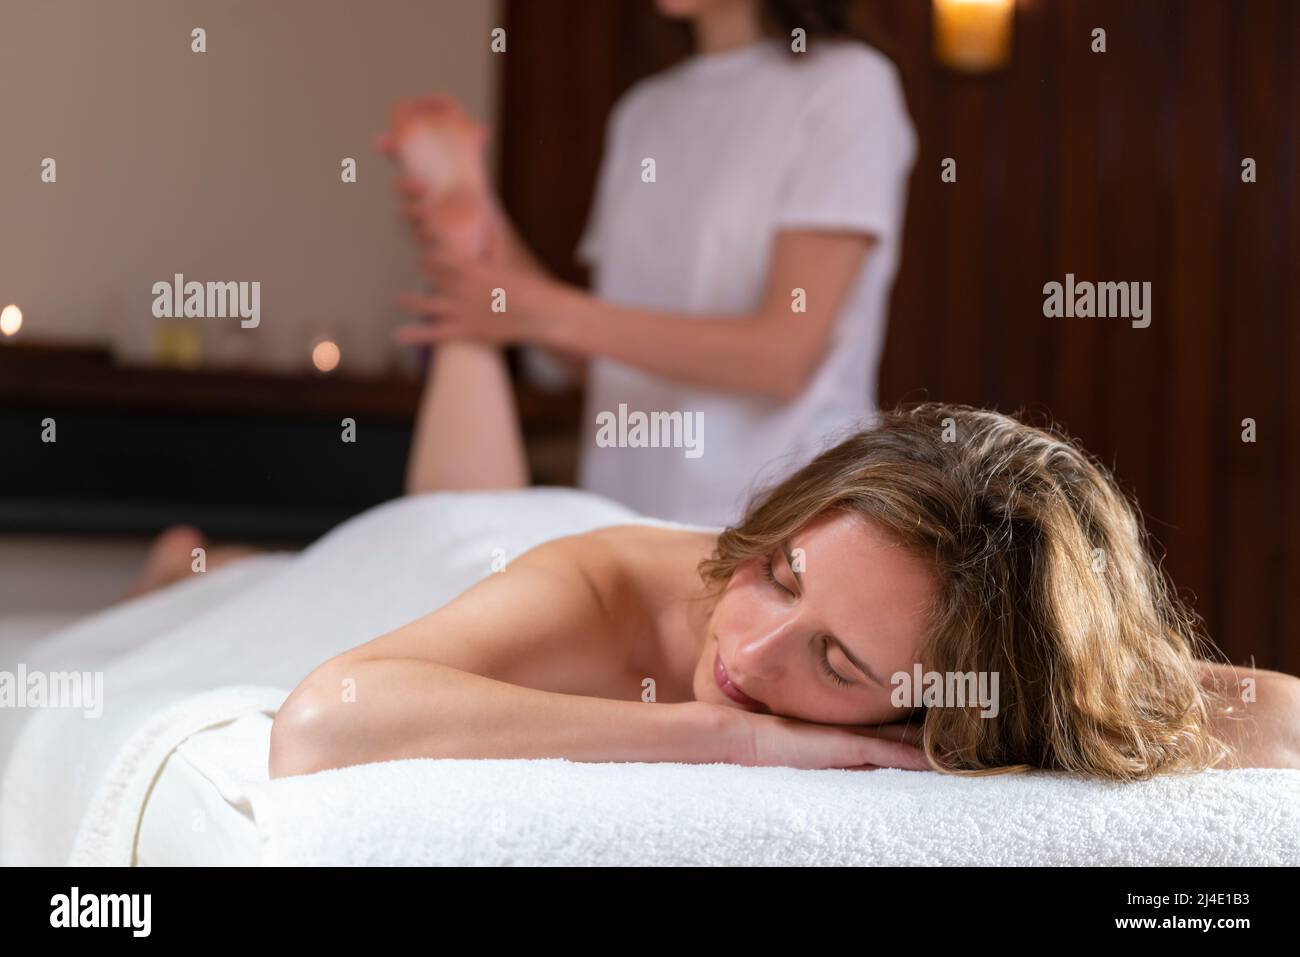 A Female physiotherapist doing a massage to another woman Stock Photo